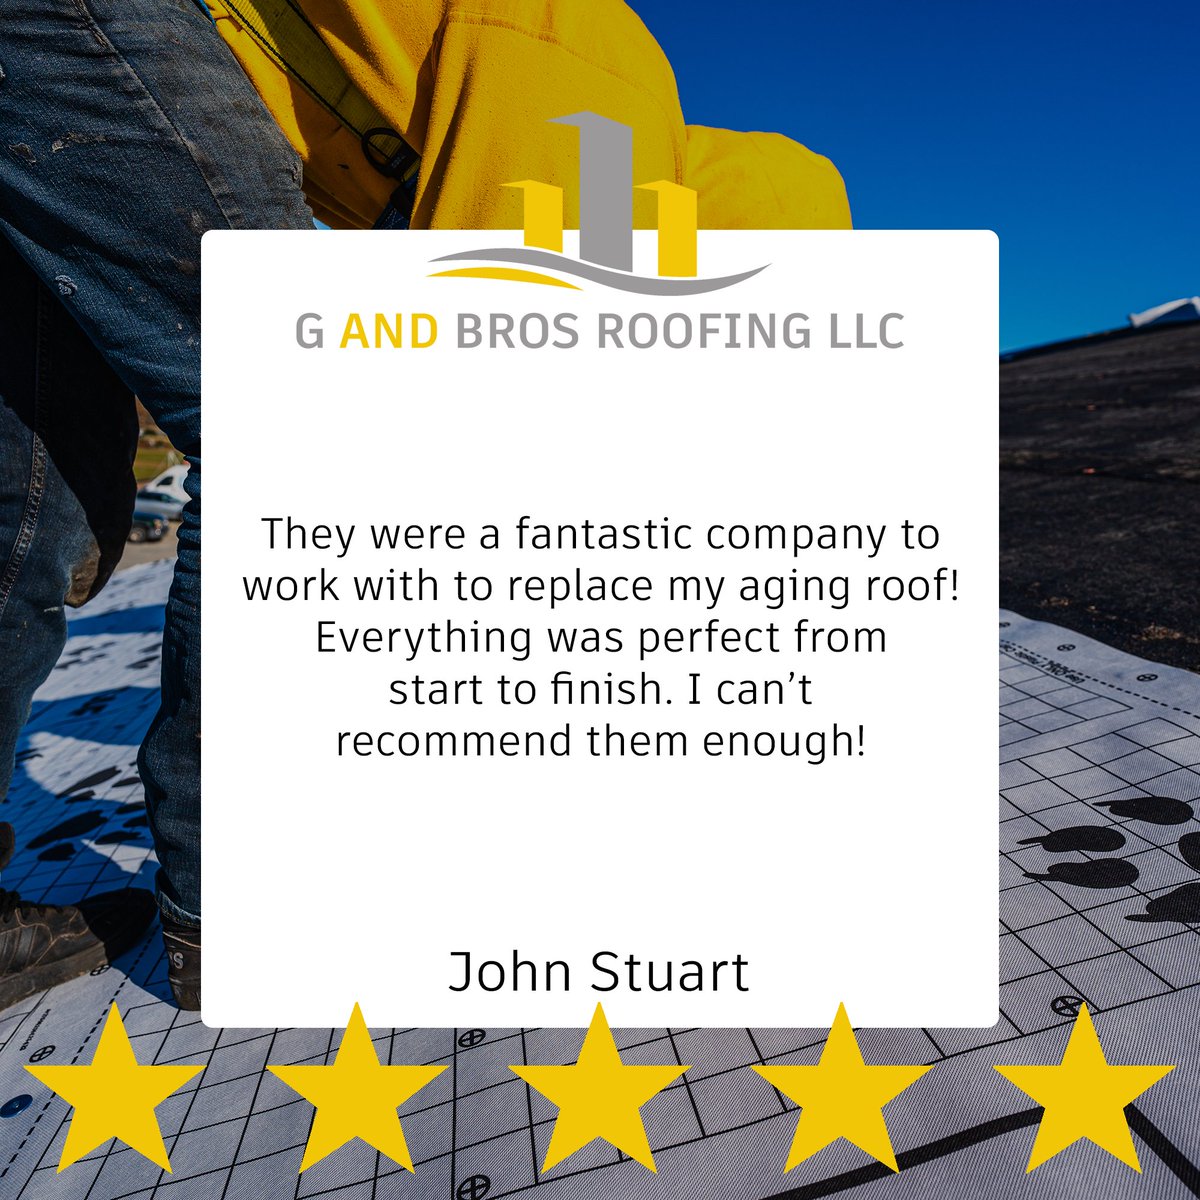 Thank you John for the kind words! It was our pleasure to remove the roof stress from you. 

=====

#MarylandRoofing #roofing #roof #roofer #contractor #roofingcontractor #homeimprovement #freeinspection #newroof #gutters #marylandroof #winddamage #stormdamage #insuranceclaims